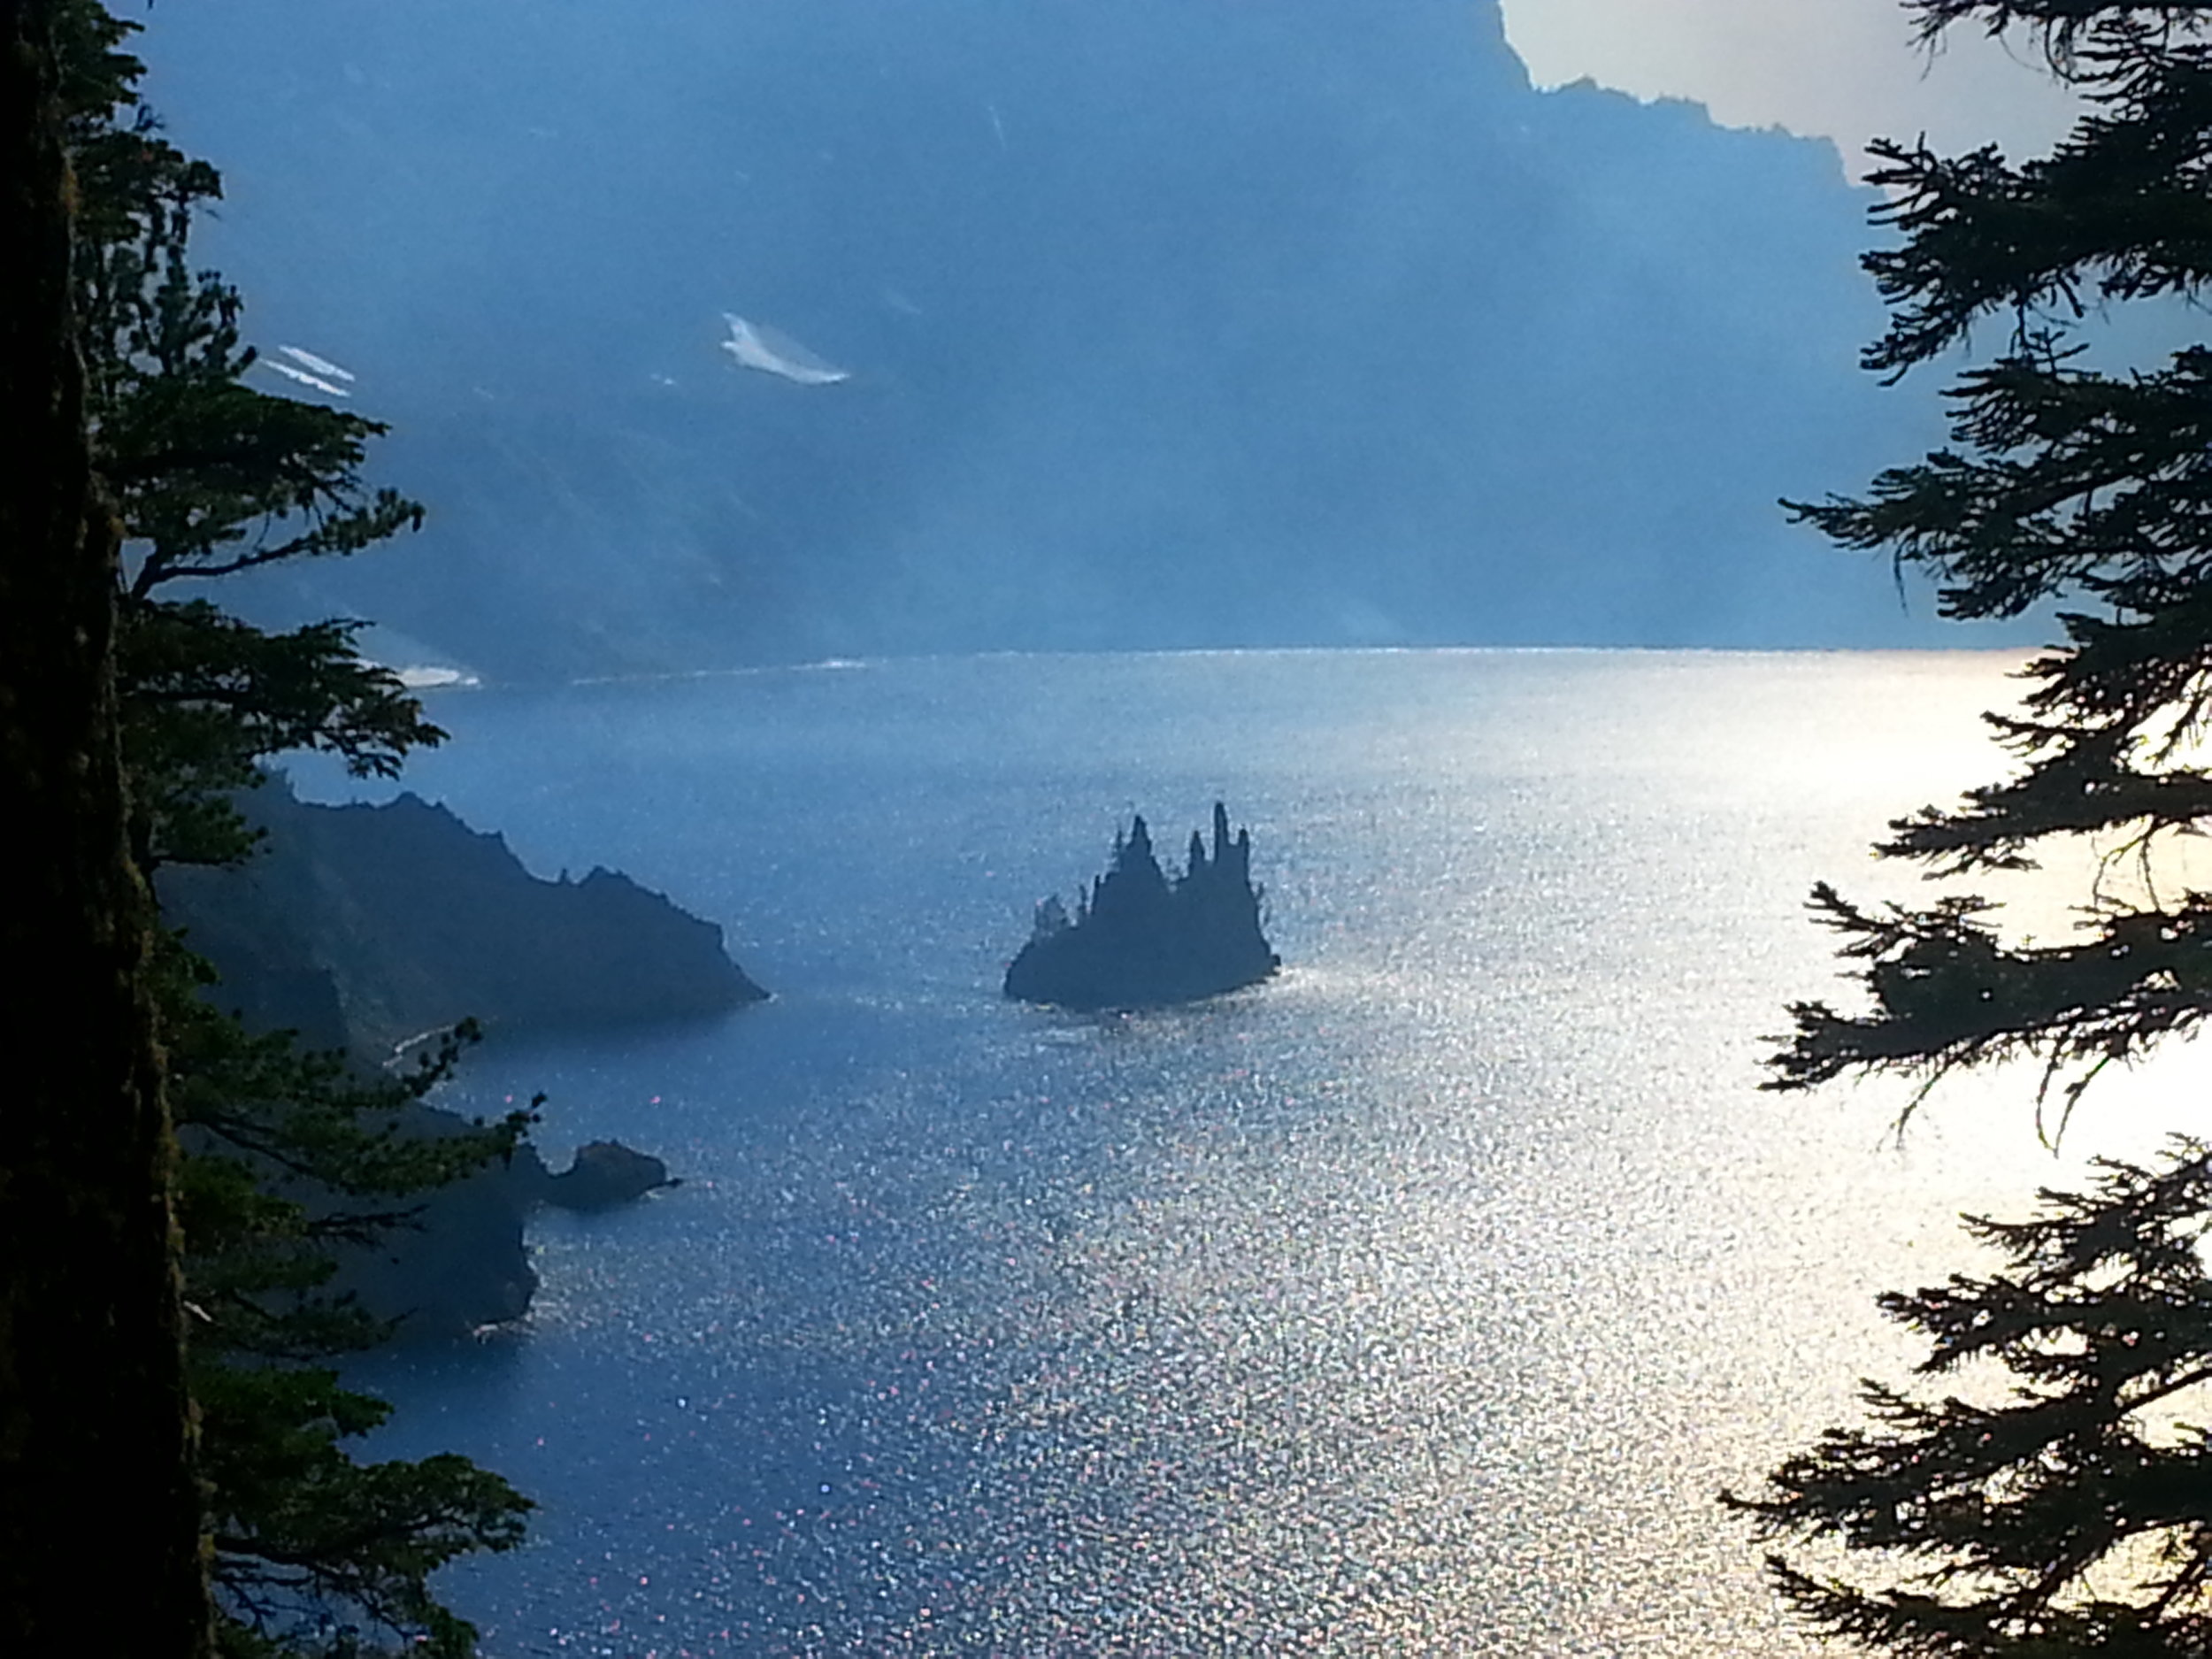 CRATER LAKE - What to do in Southern Oregon - Summer - Things to do - Kids - Hiking - Junior Rangers